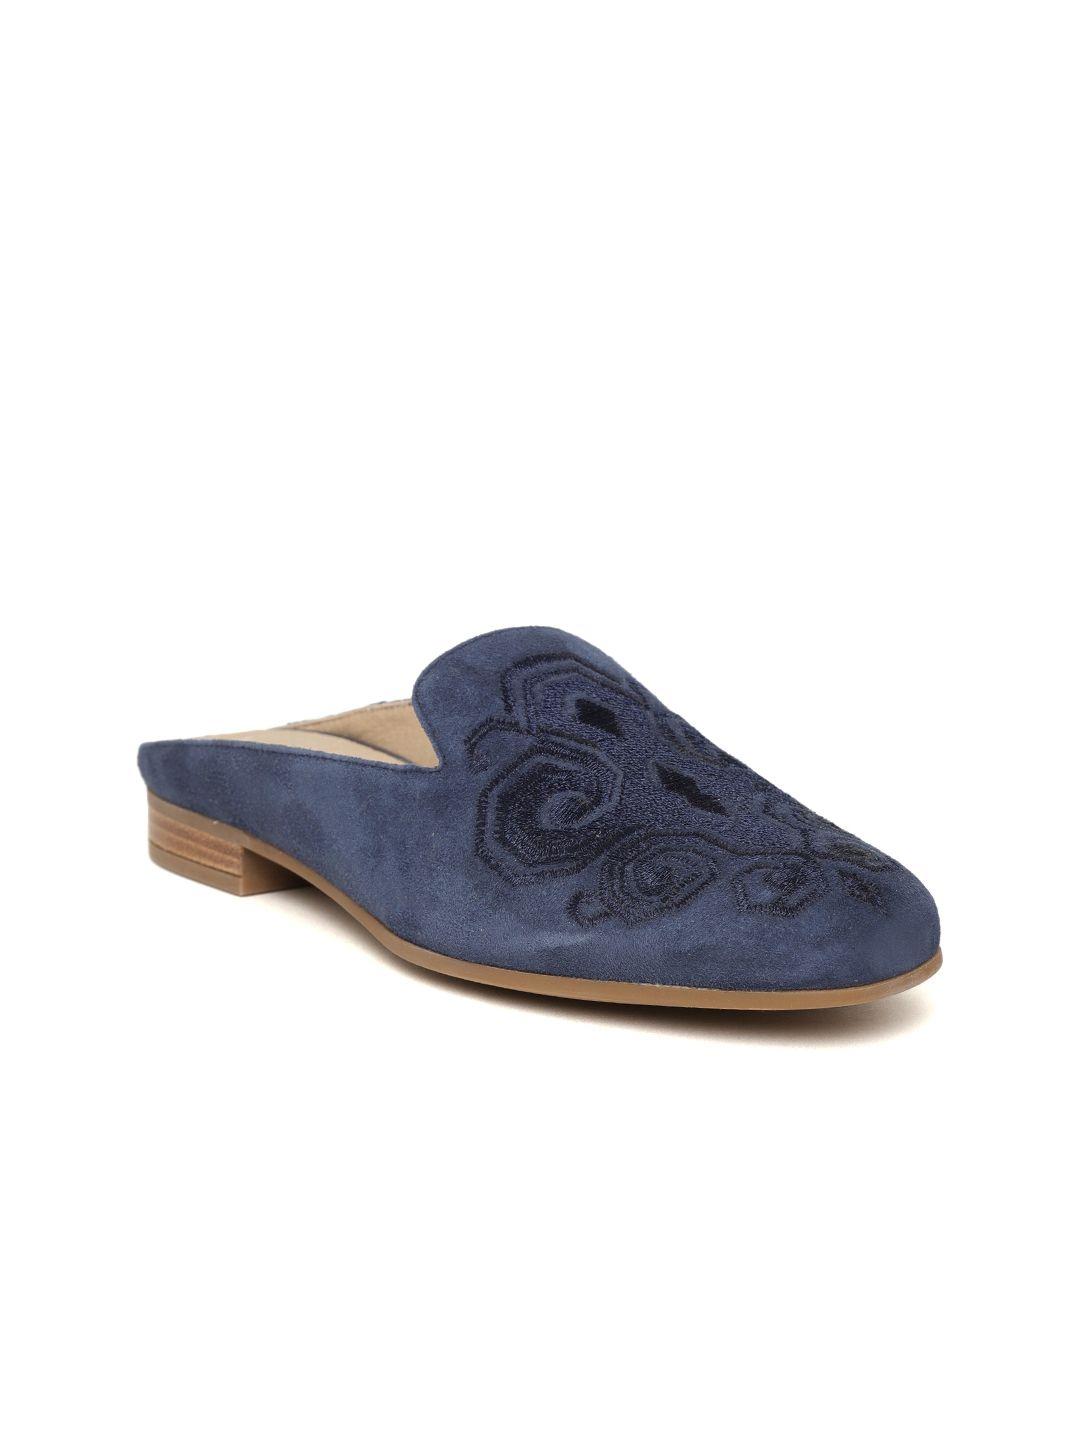 geox women navy blue suede leather embroidered mules